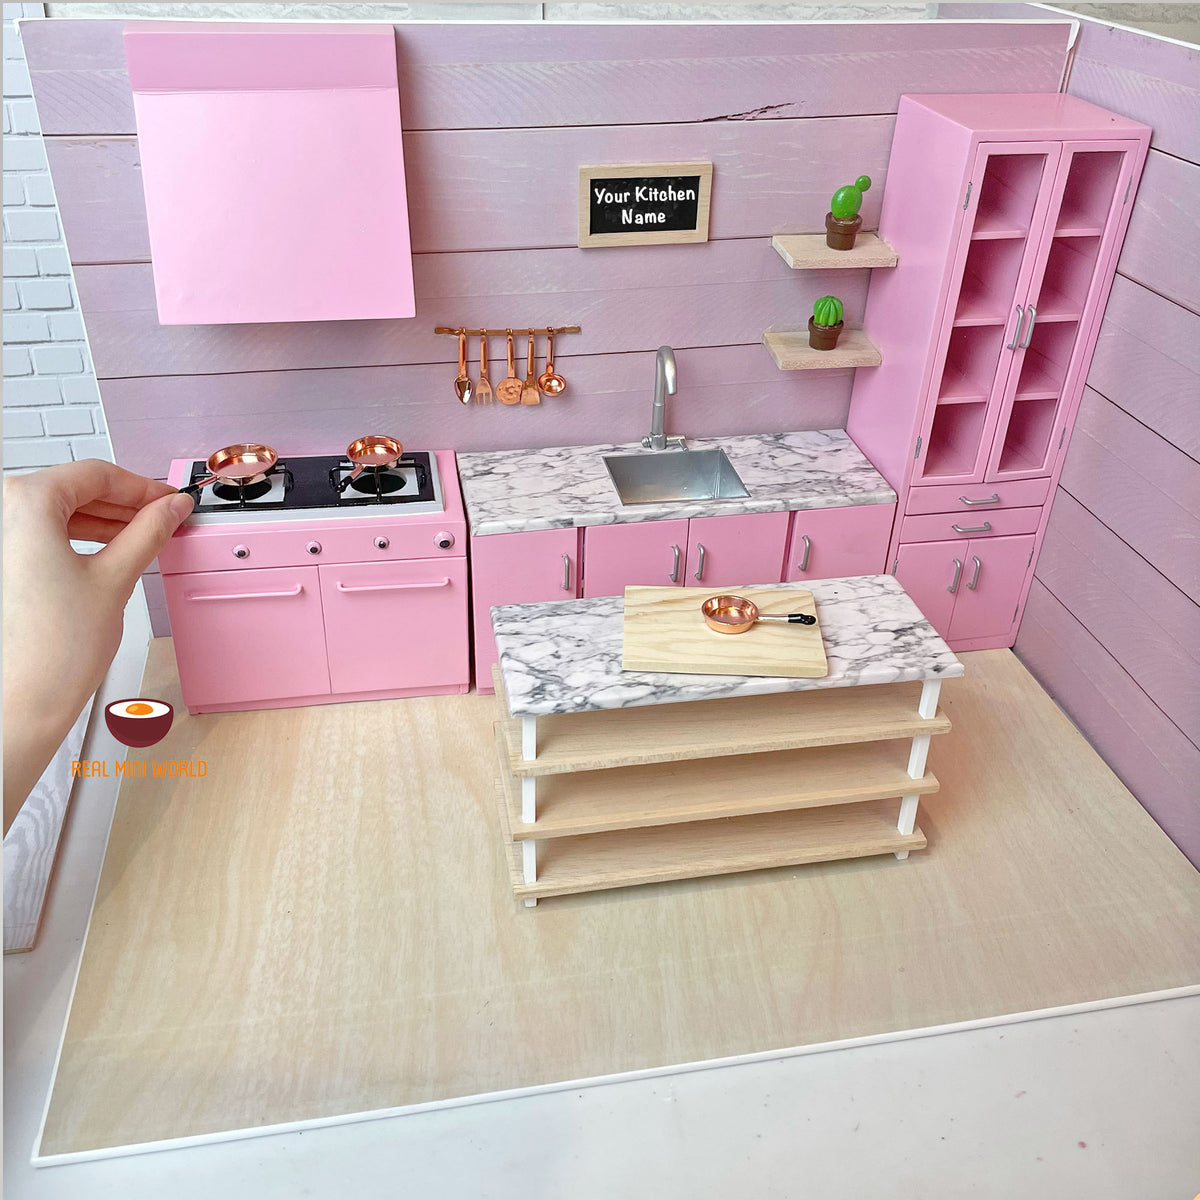 Iland Wooden Dollhouse Furniture Set on 1/12 Scale for Dollhouse Kitchen Incl Modern Miniature Kitchen Cabinets, Fridge, Oven, Microwave, Pots Set, CA